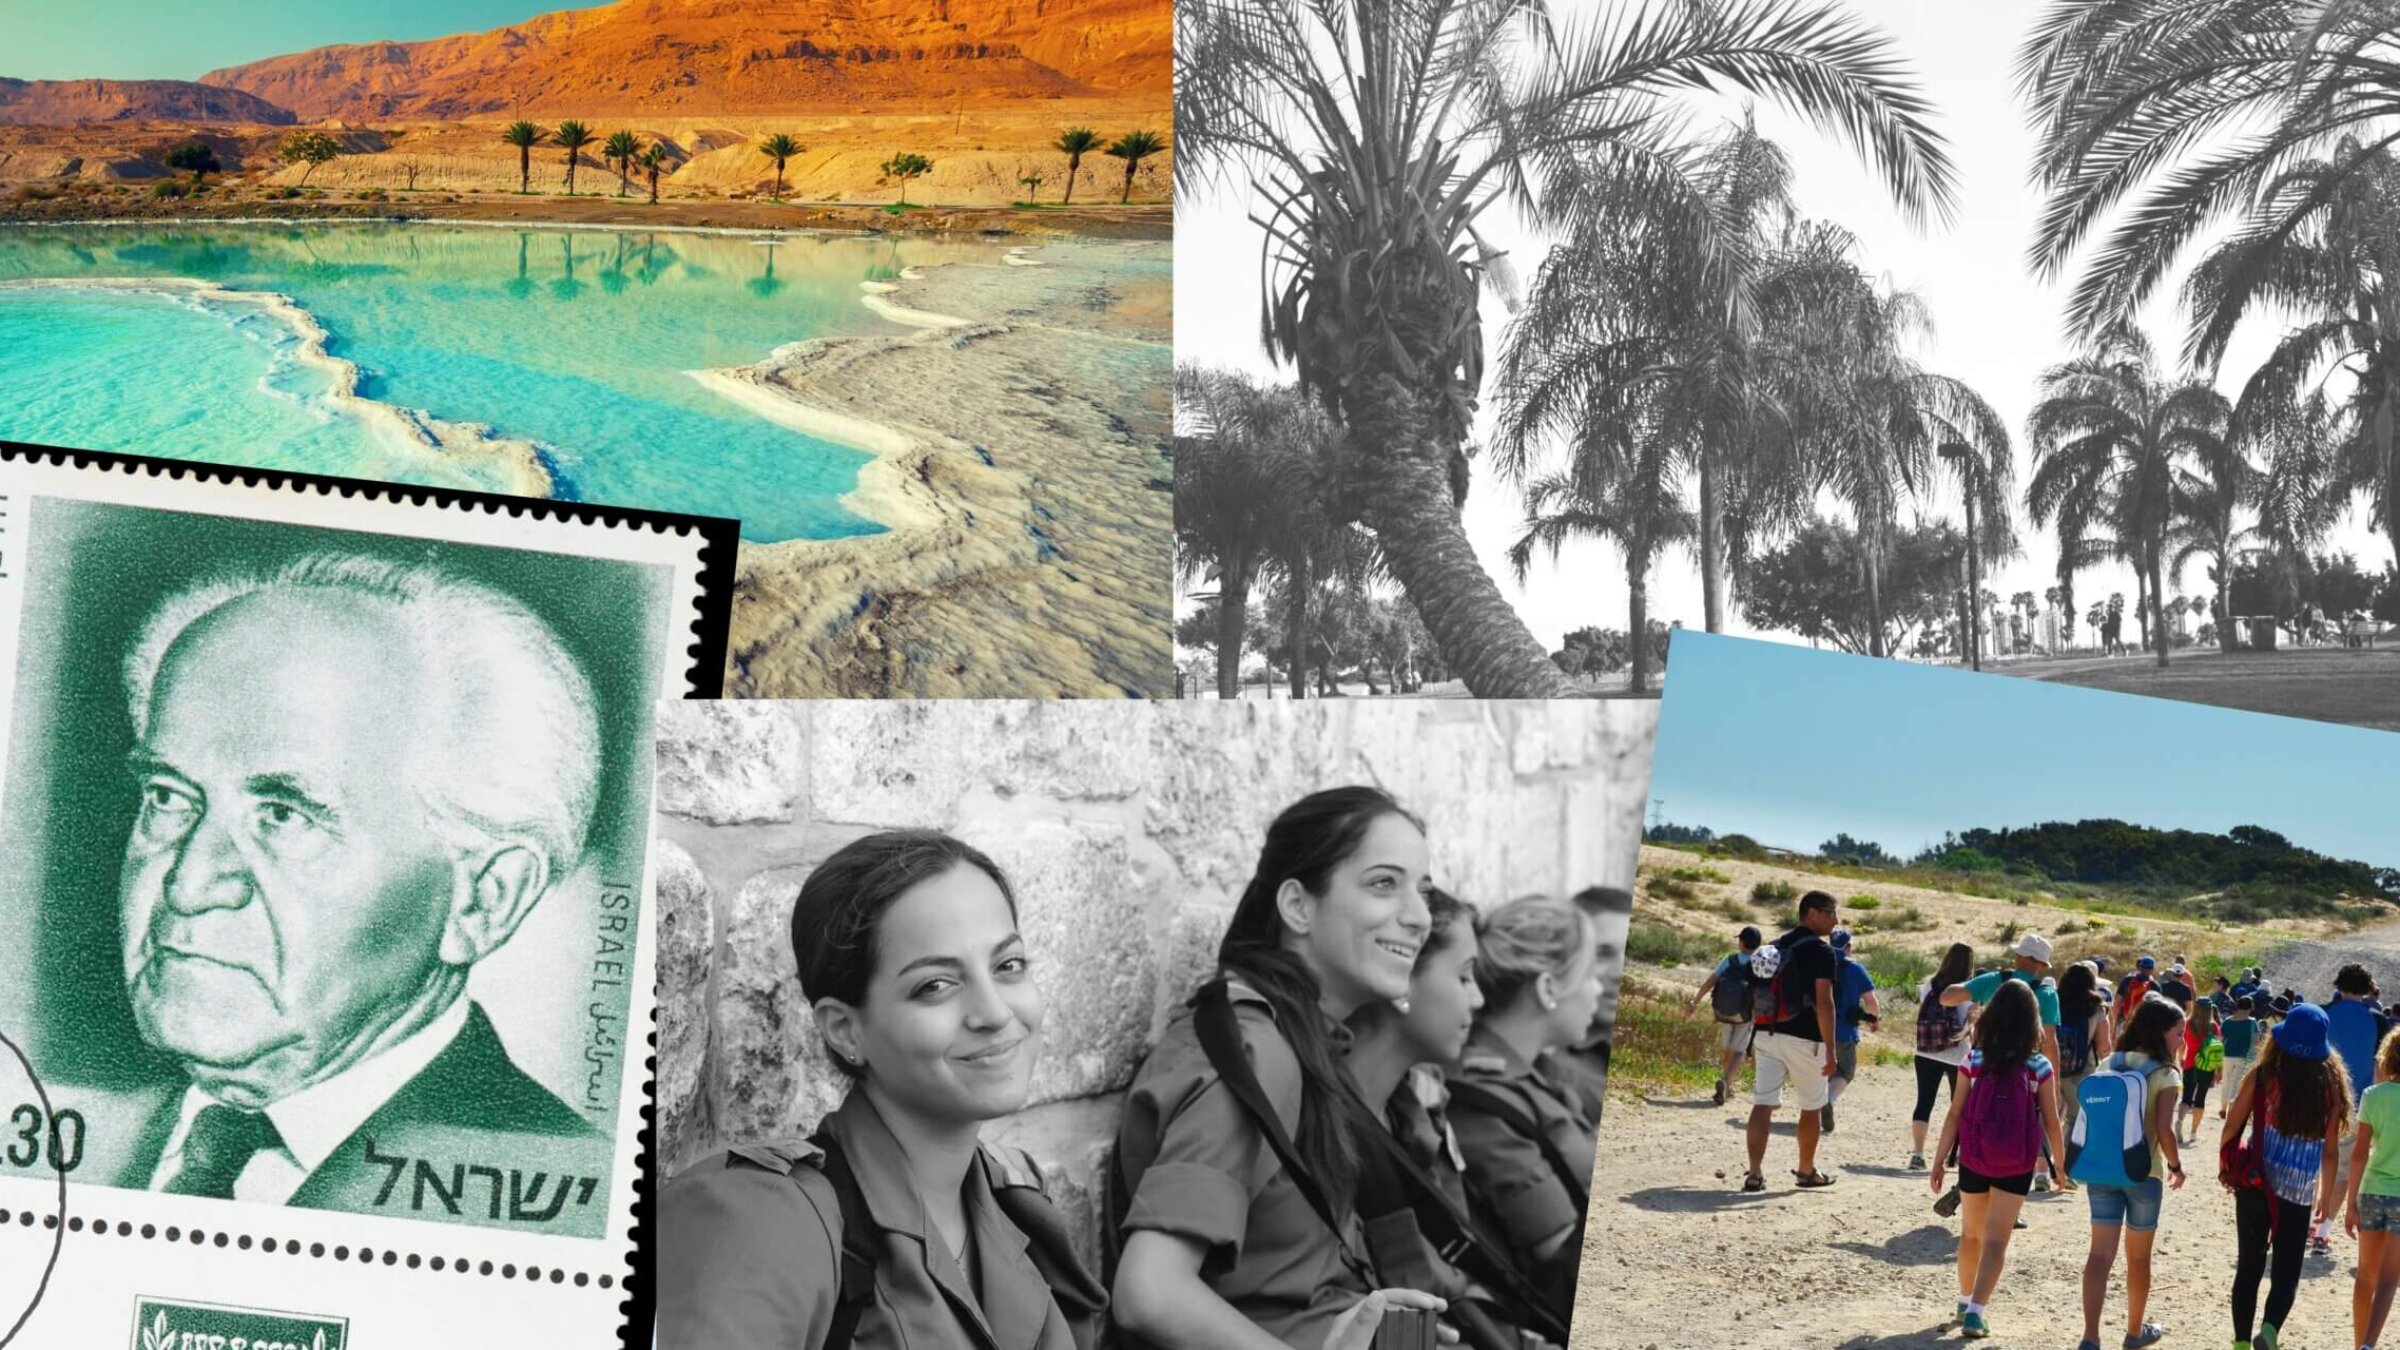 From top left: The Dead Sea, Israeli palm trees, Israeli children hiking, IDF soldiers at the Western Wall, David Ben-Gurion on a stamp. 

Illustration by Tani Levitt/Getty/istock/Canva